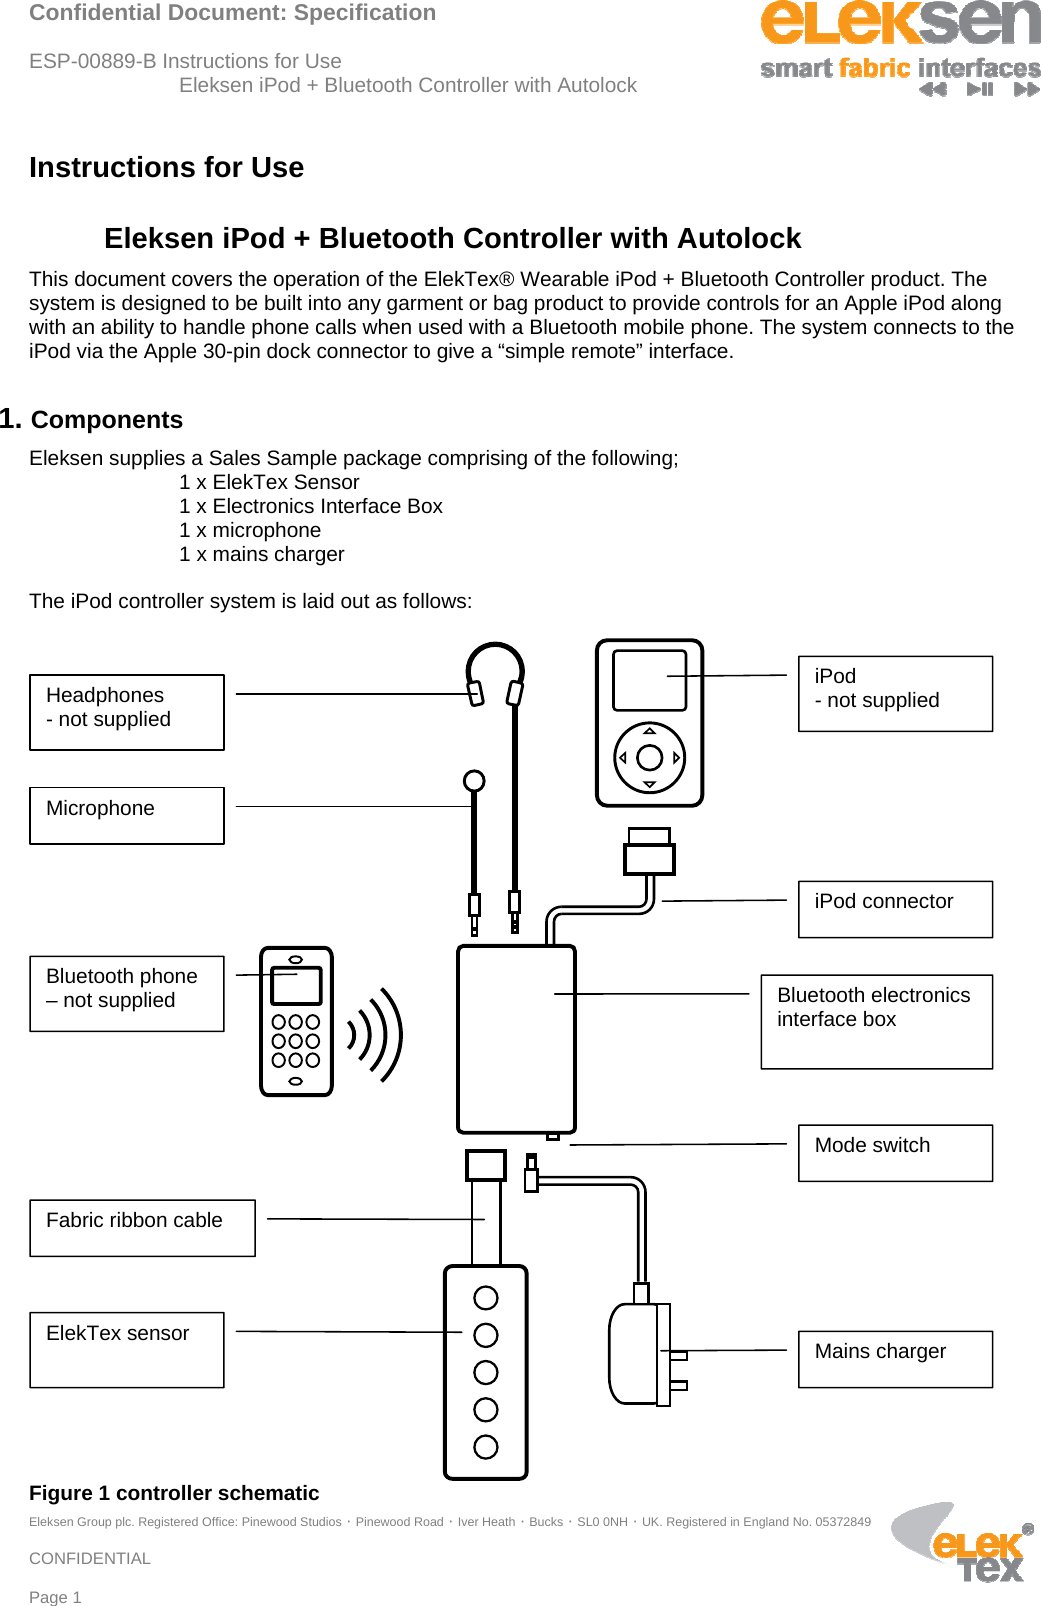 Confidential Document: Specification  ESP-00889-B Instructions for Use  Eleksen iPod + Bluetooth Controller with Autolock Eleksen Group plc. Registered Office: Pinewood Studios · Pinewood Road · Iver Heath · Bucks · SL0 0NH · UK. Registered in England No. 05372849  CONFIDENTIAL  Page 1 Instructions for Use Eleksen iPod + Bluetooth Controller with Autolock This document covers the operation of the ElekTex® Wearable iPod + Bluetooth Controller product. The system is designed to be built into any garment or bag product to provide controls for an Apple iPod along with an ability to handle phone calls when used with a Bluetooth mobile phone. The system connects to the iPod via the Apple 30-pin dock connector to give a “simple remote” interface. 1. Components Eleksen supplies a Sales Sample package comprising of the following; 1 x ElekTex Sensor     1 x Electronics Interface Box 1 x microphone 1 x mains charger  The iPod controller system is laid out as follows:   Figure 1 controller schematic ElekTex sensor  Bluetooth electronics interface box  iPod connector iPod  - not supplied Headphones  - not supplied Fabric ribbon cable Bluetooth phone – not supplied Microphone Mode switch Mains charger 